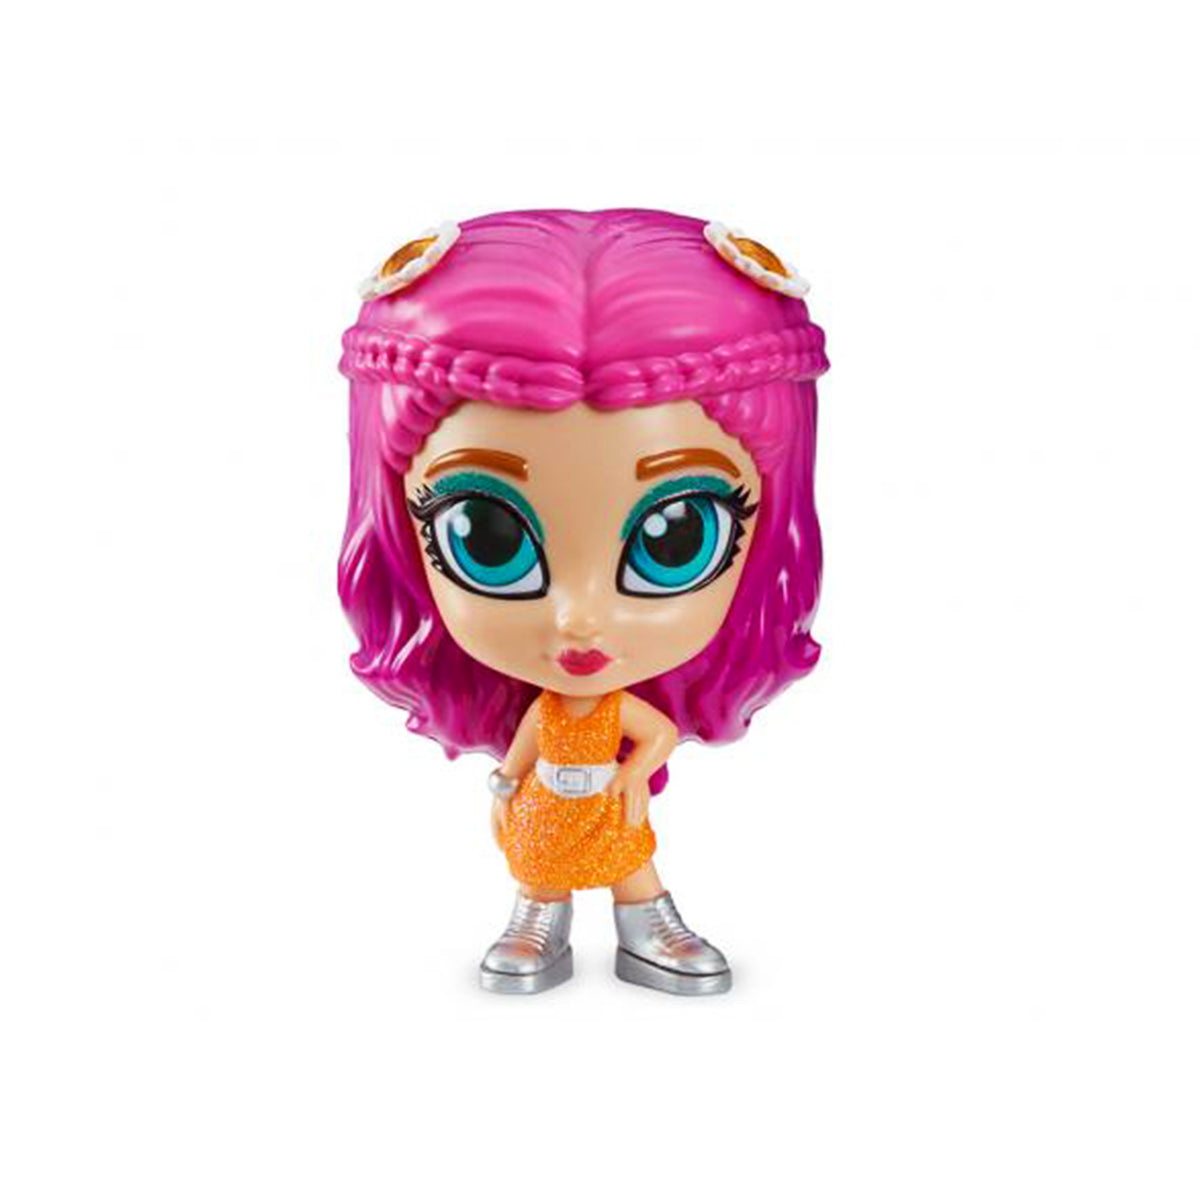 Shimmer 'N Sparkle - Instagram Dolls (Styles Vary - One Supplied)